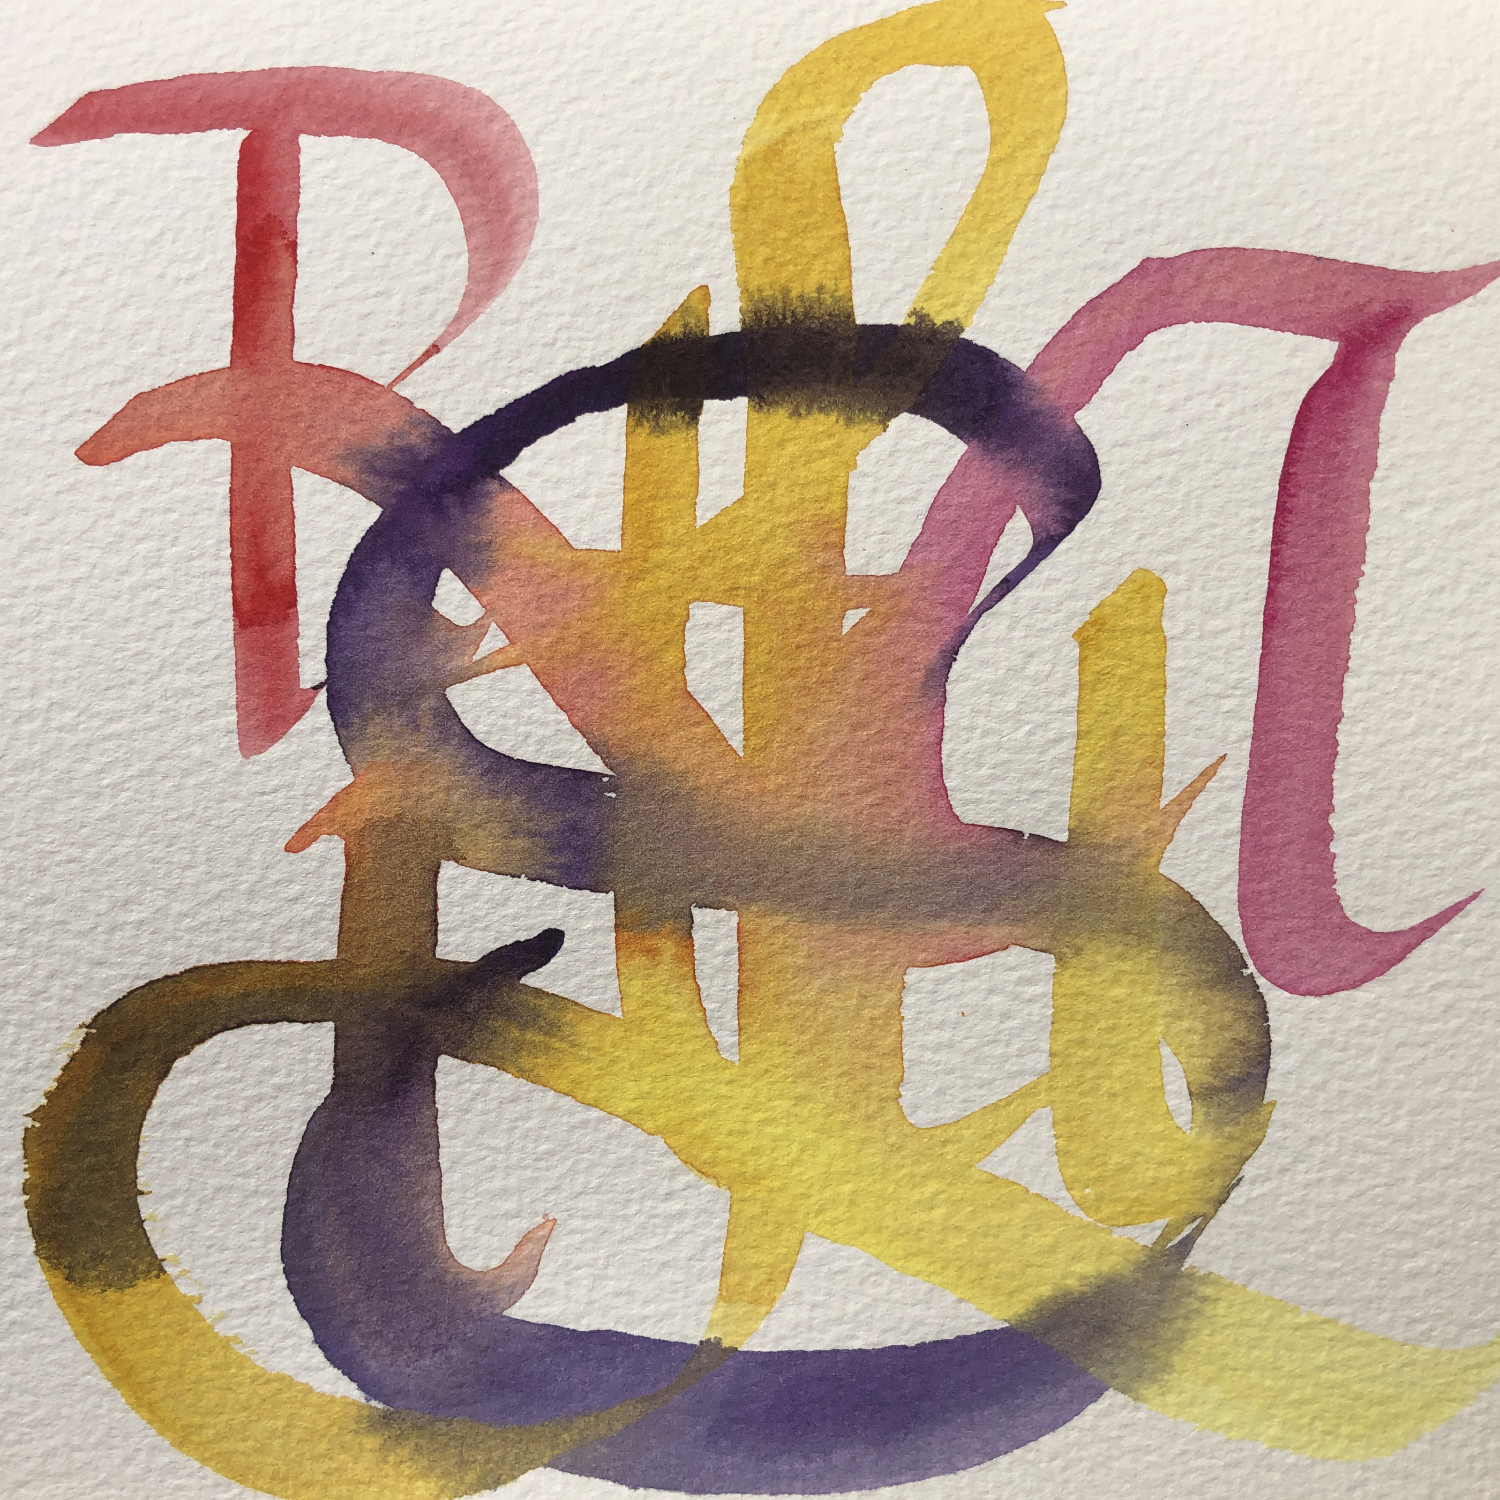 The word Rituals, letters overlapping, in purple, yellow, and pink on an off-white background